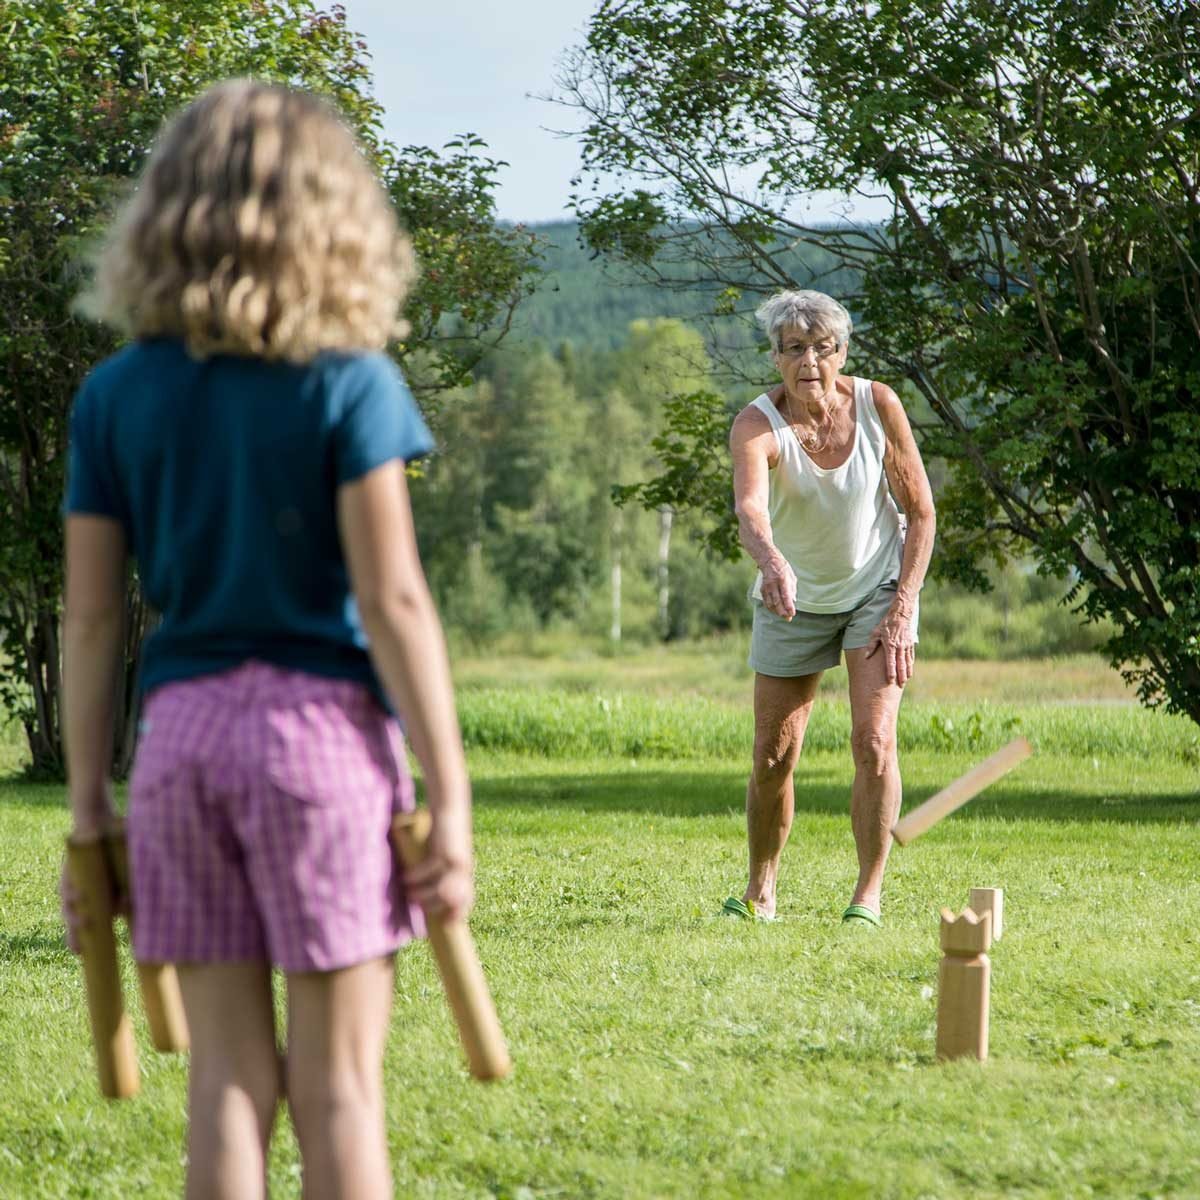 How to Get In On the Kubb Craze